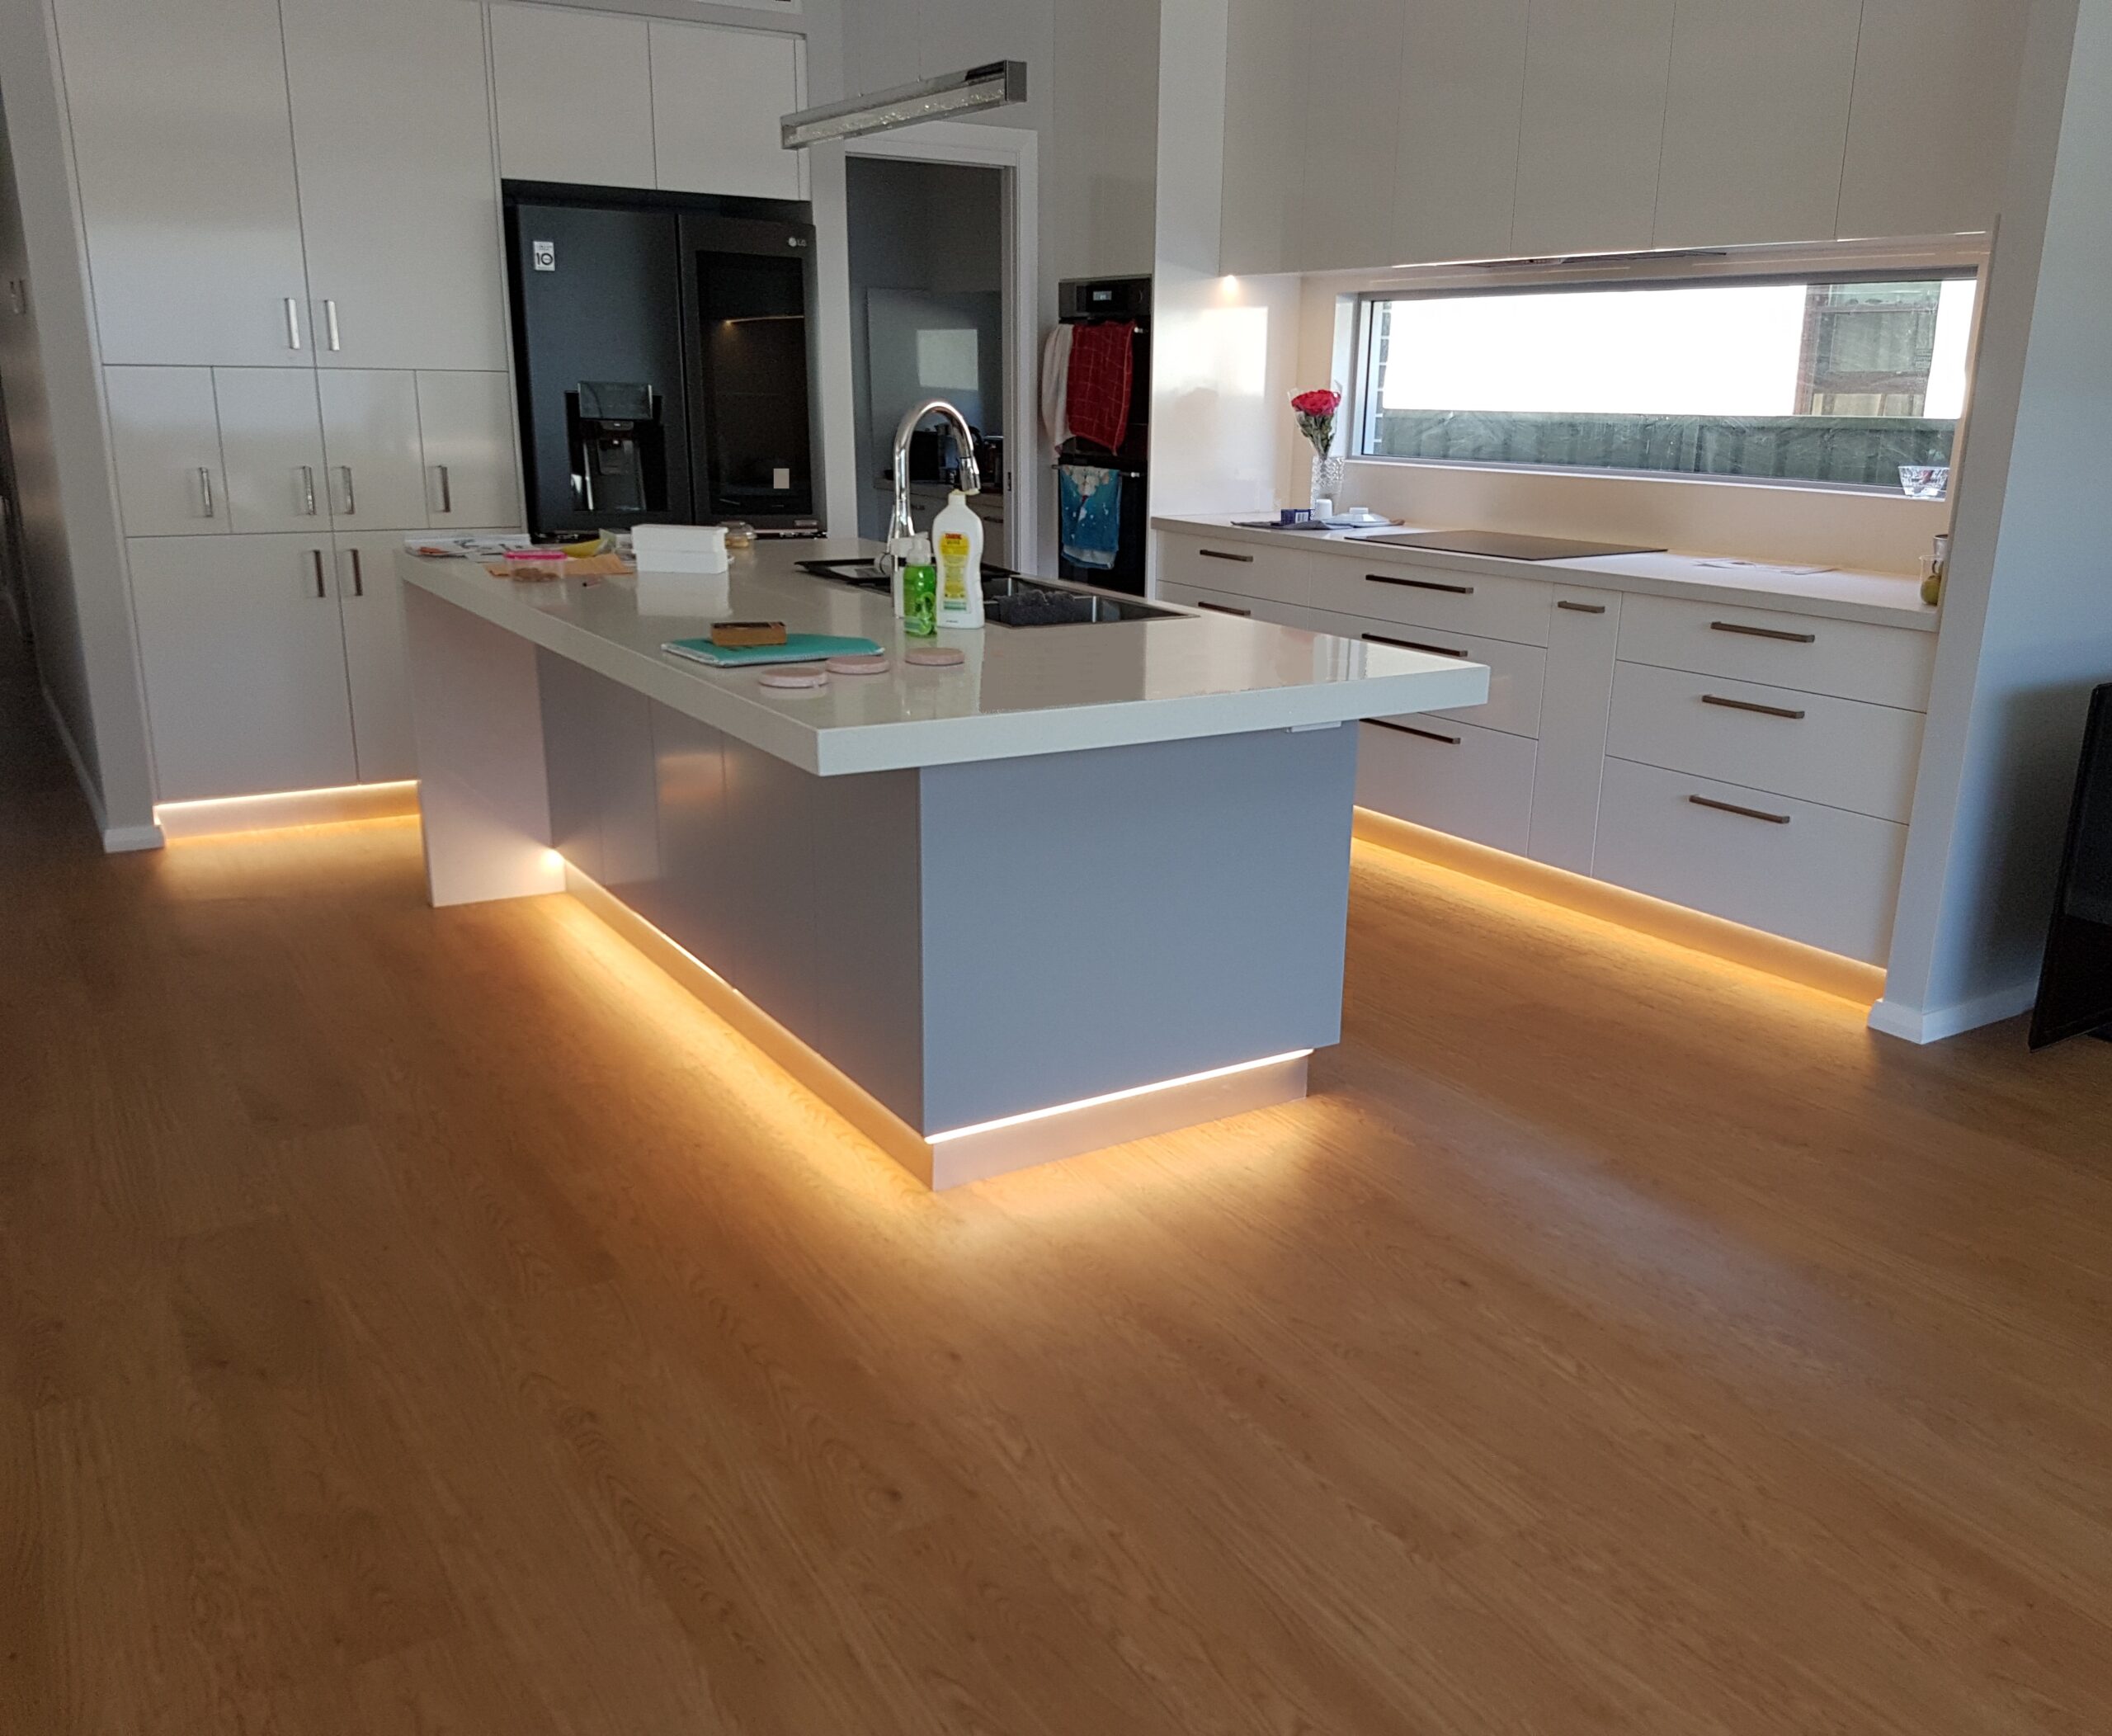 Residential LED lighting upgrades by experienced electricians